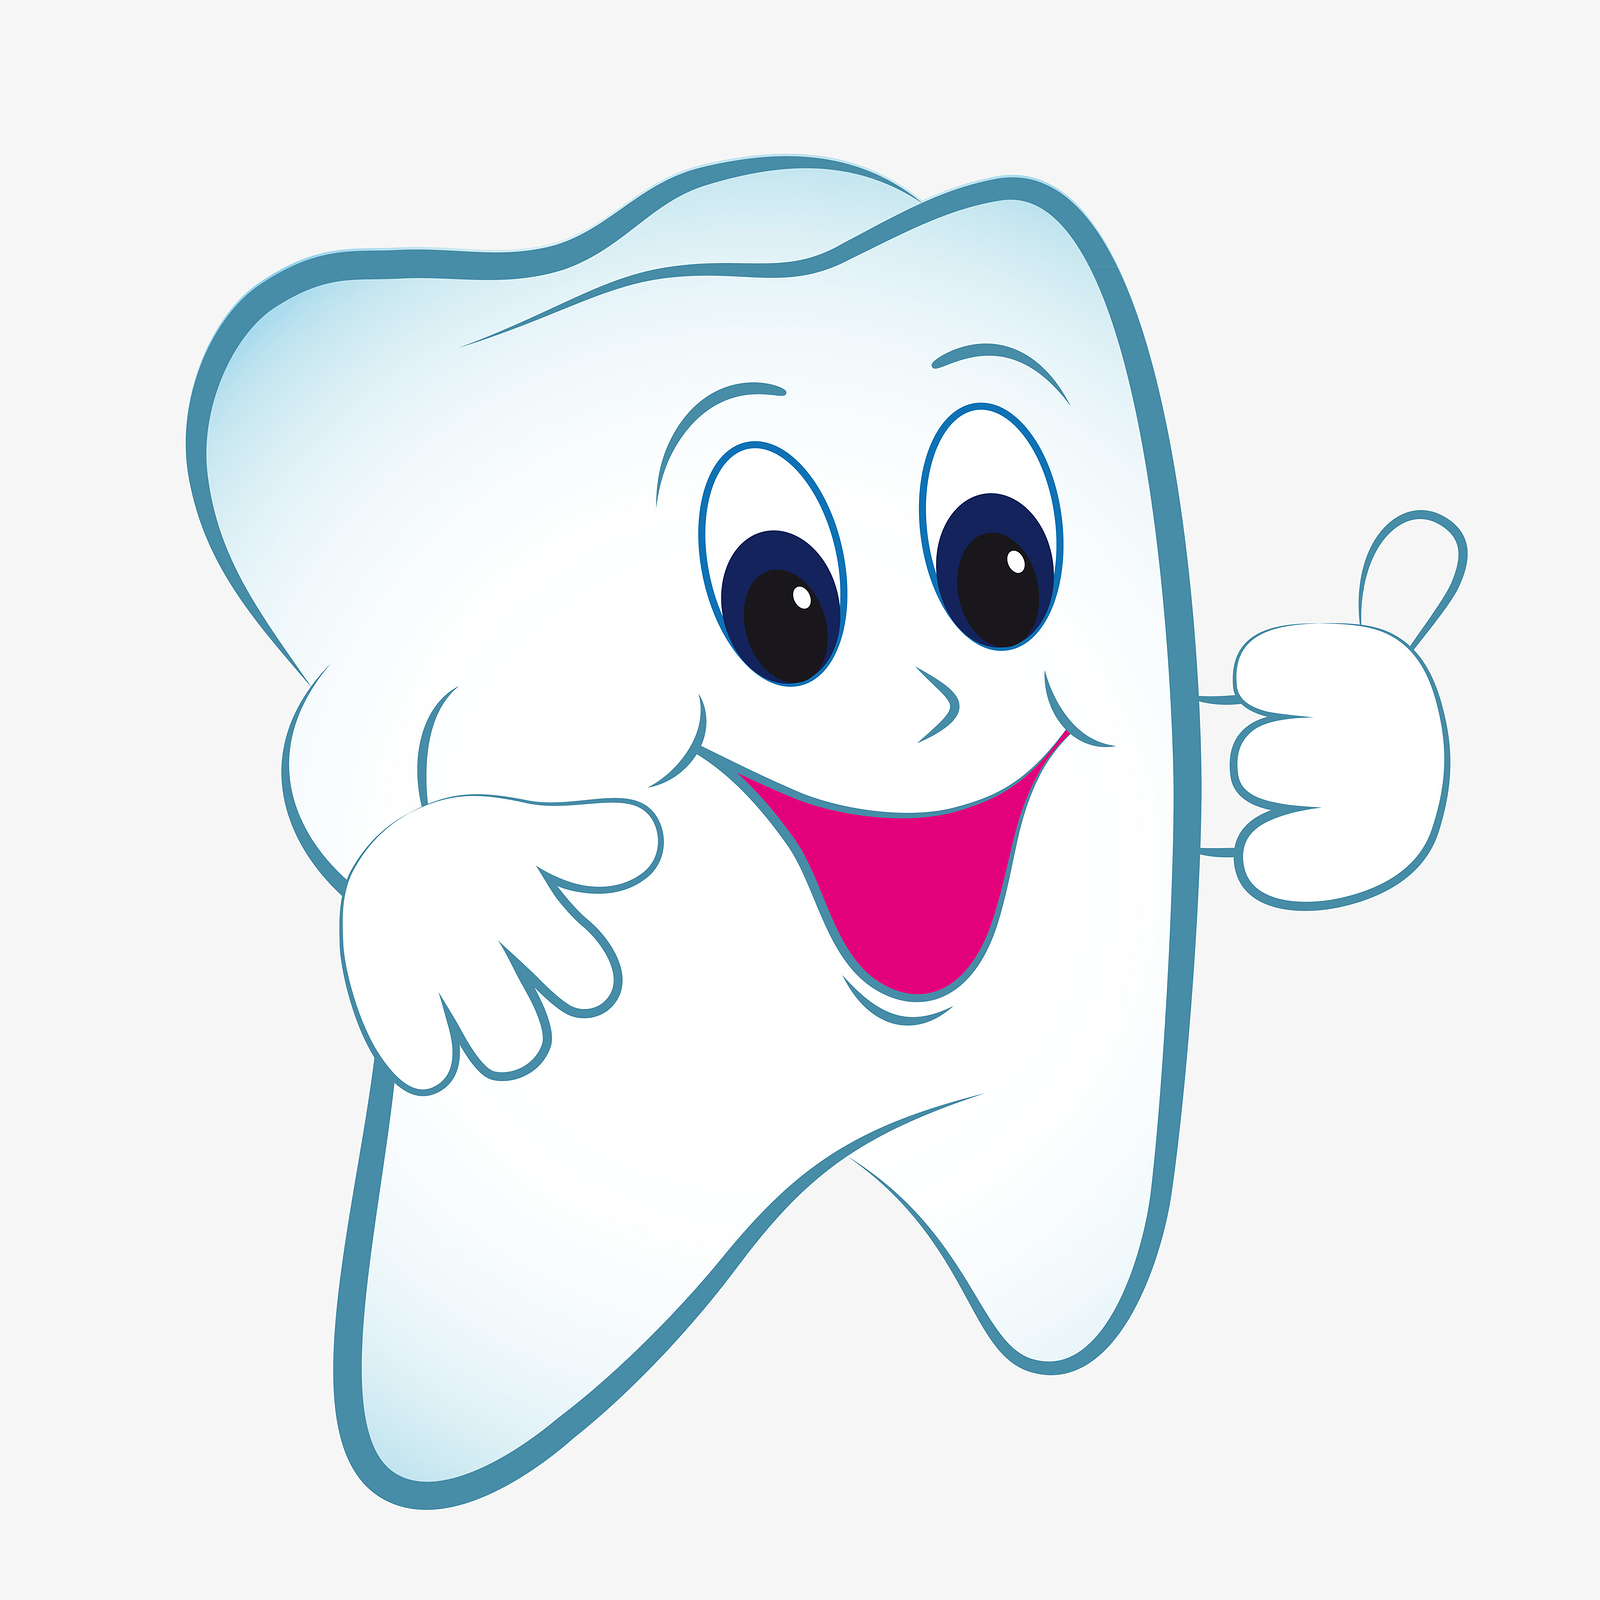 Dentist Cartoon Images For Kids Images & Pictures - Becuo